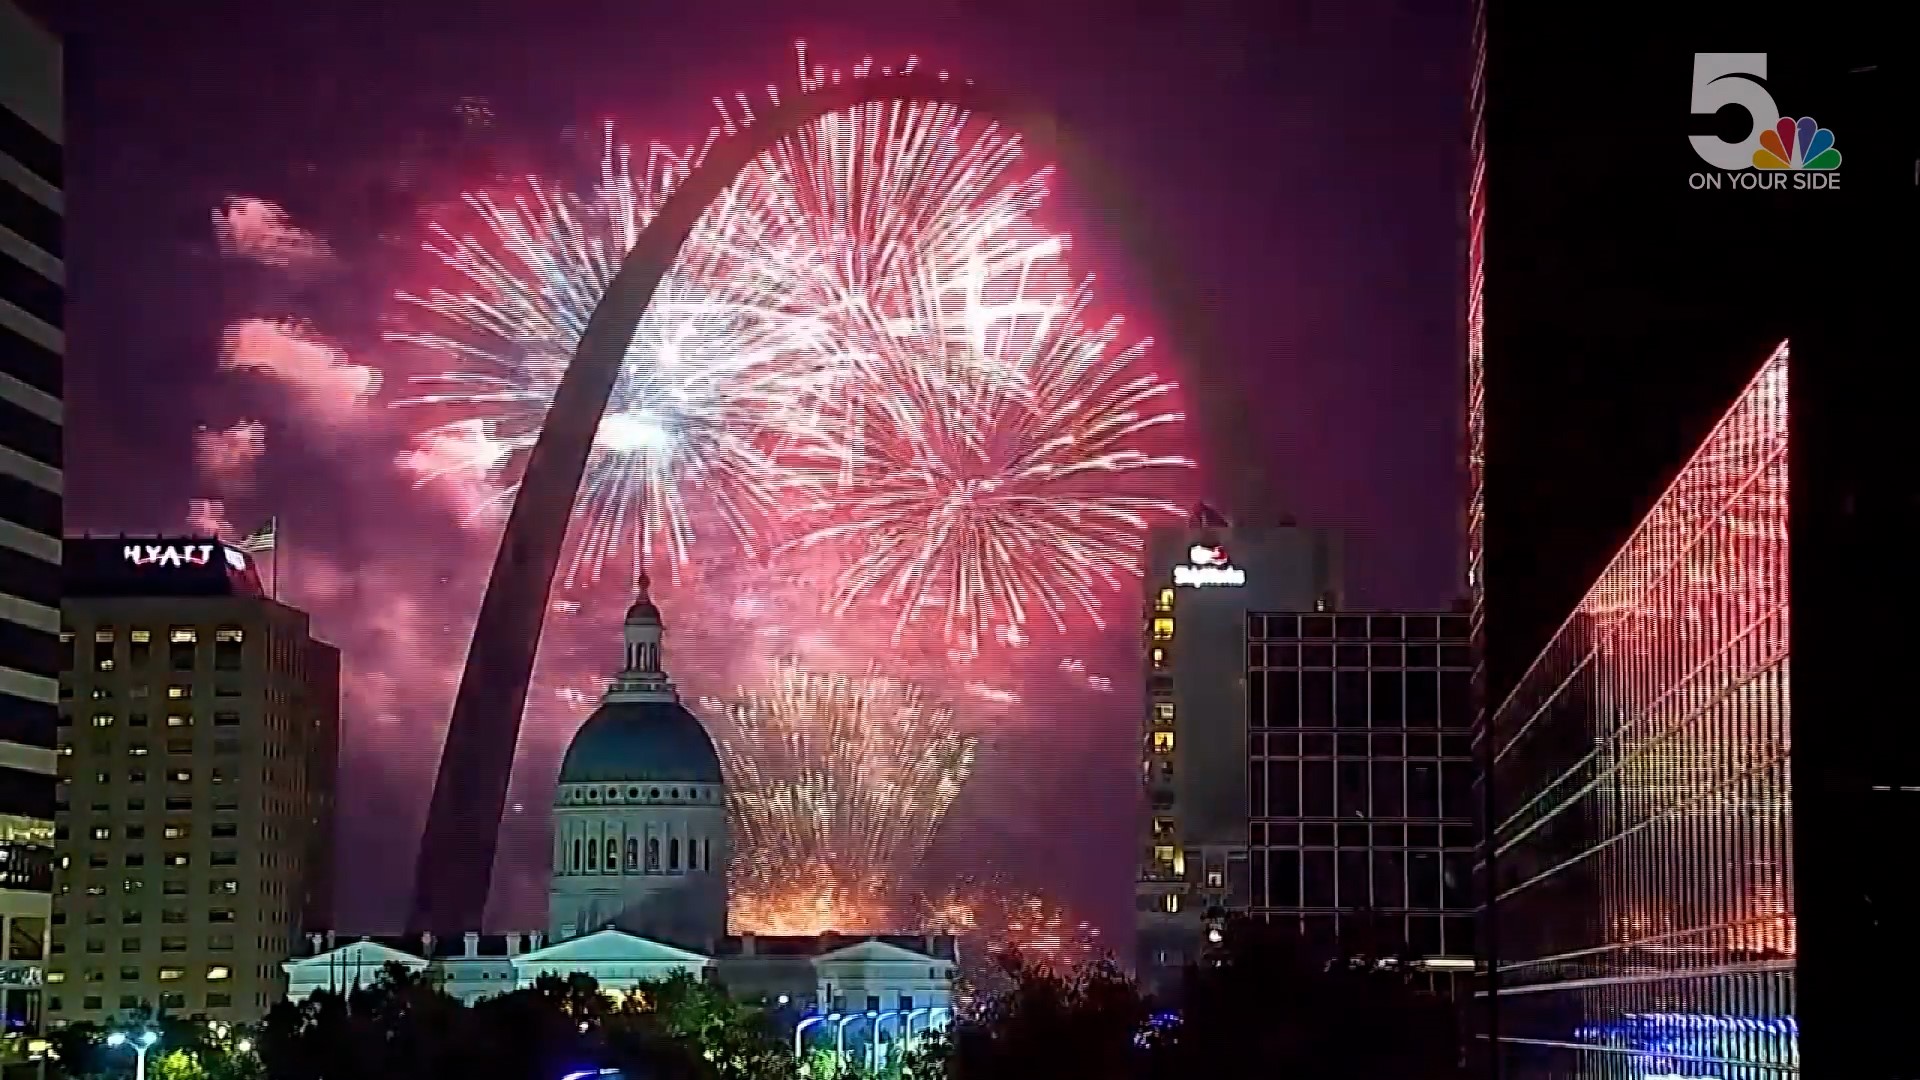 Celebrate Saint Louis ends a long day of July 4 festivities with a fireworks display framed by the Arch. The show begins at 9:40 p.m.